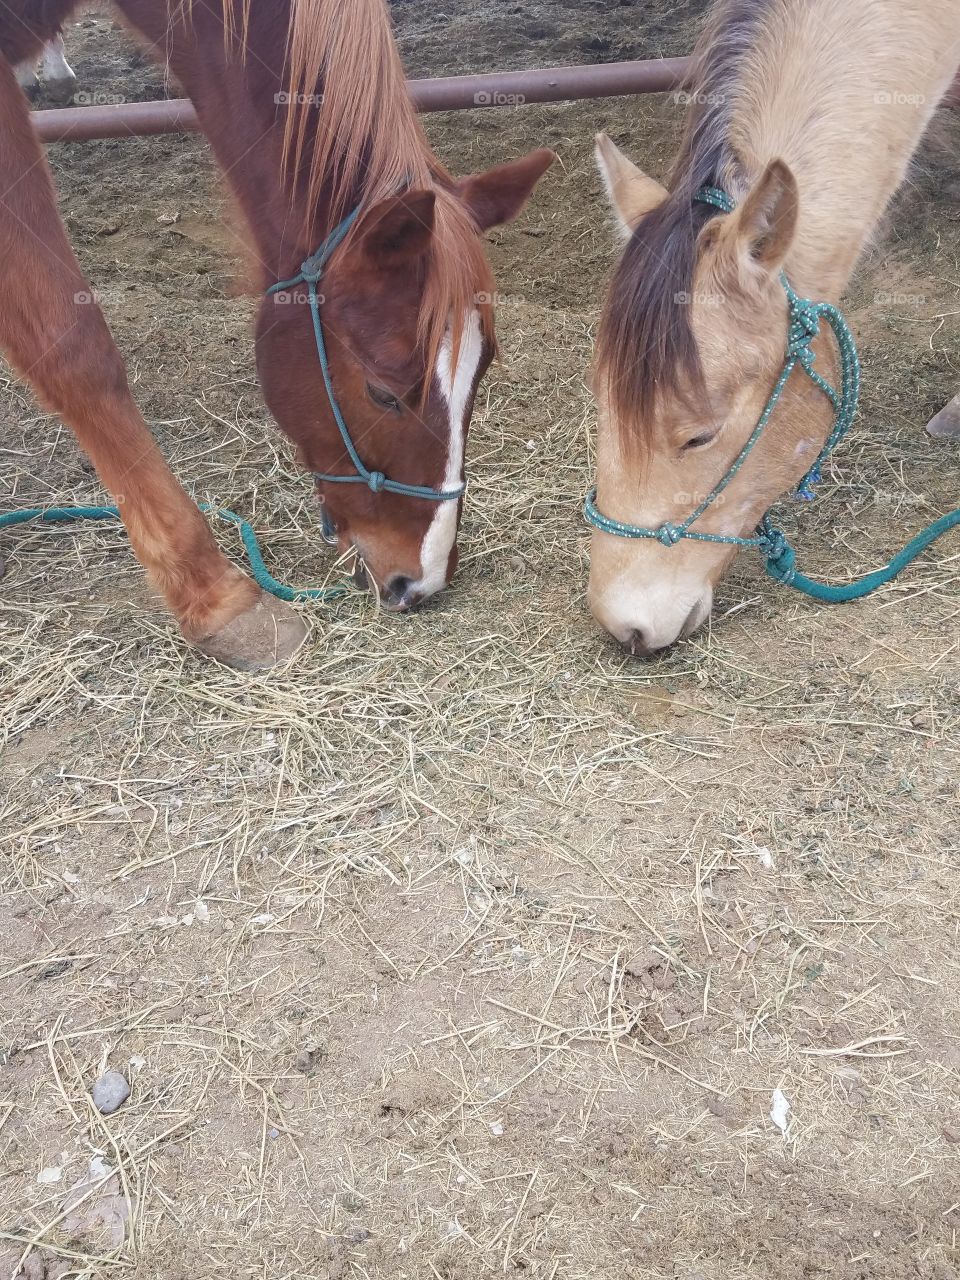 Two Horses eating together